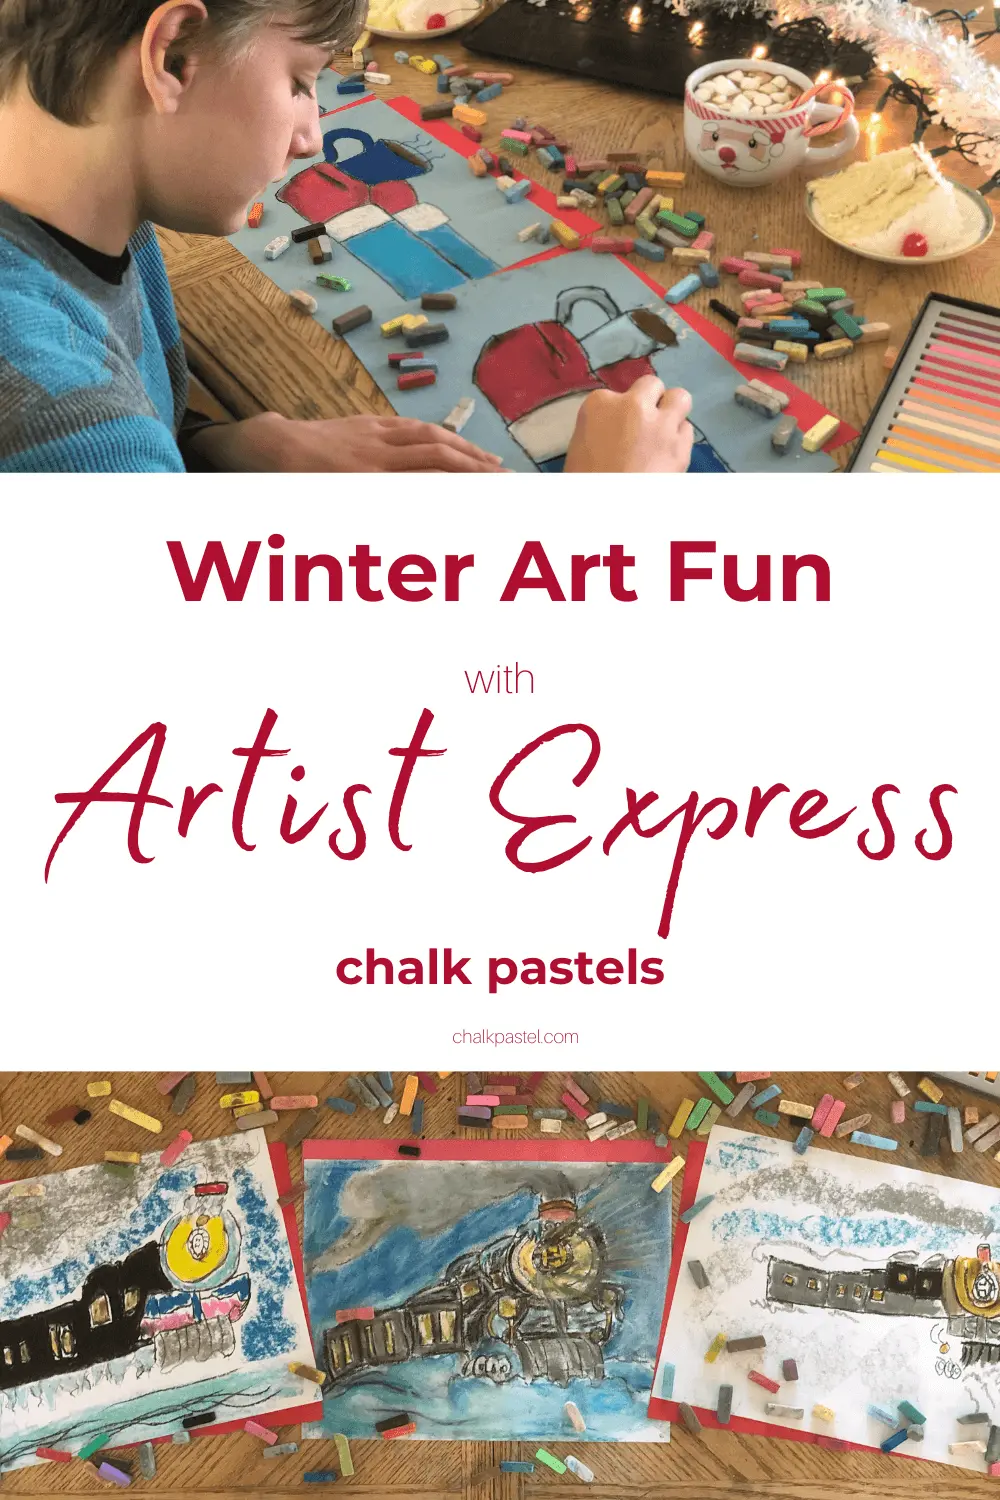 Winter Art Fun with Artist Express Chalk Pastels: Are you looking to add some cozy winter art fun for your kiddos this holiday season? Chalk Pastels are an easy way to help kids get creative! #homeschool #homeschooling #chalkpastels #winterart #winterartfun #